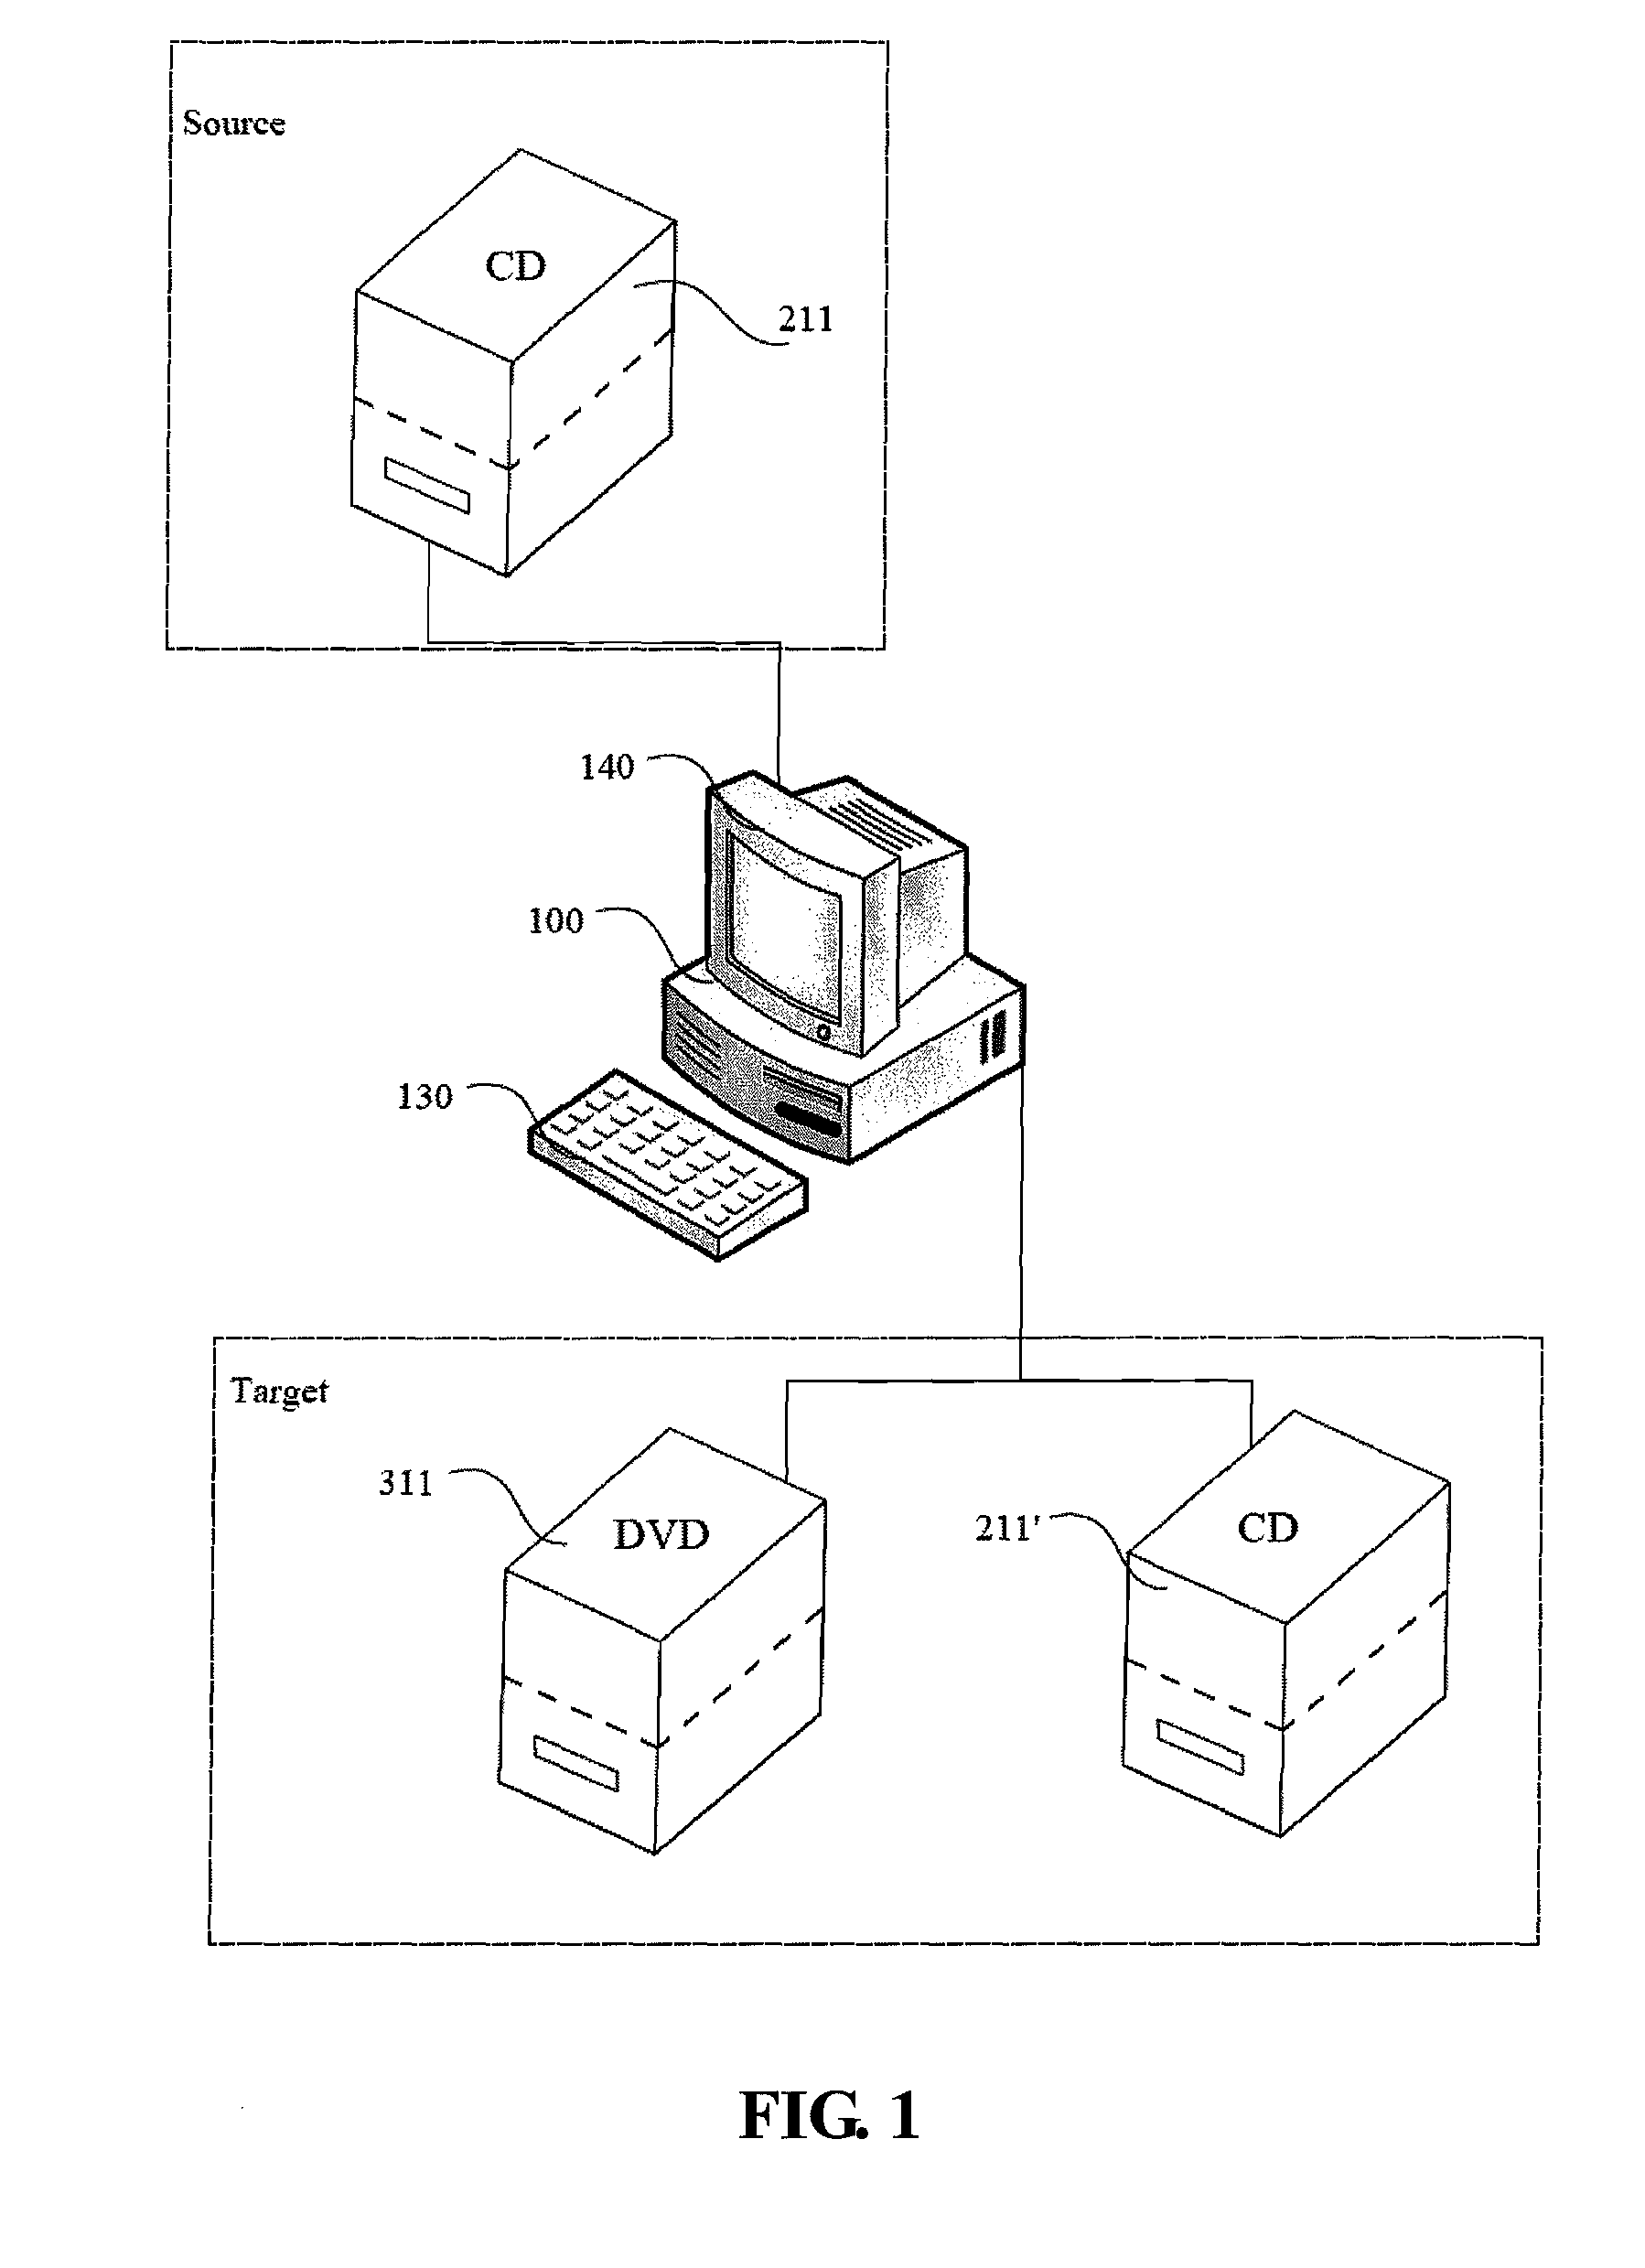 Reproducing system for mediums and method for reproducing digital data and identifying the same